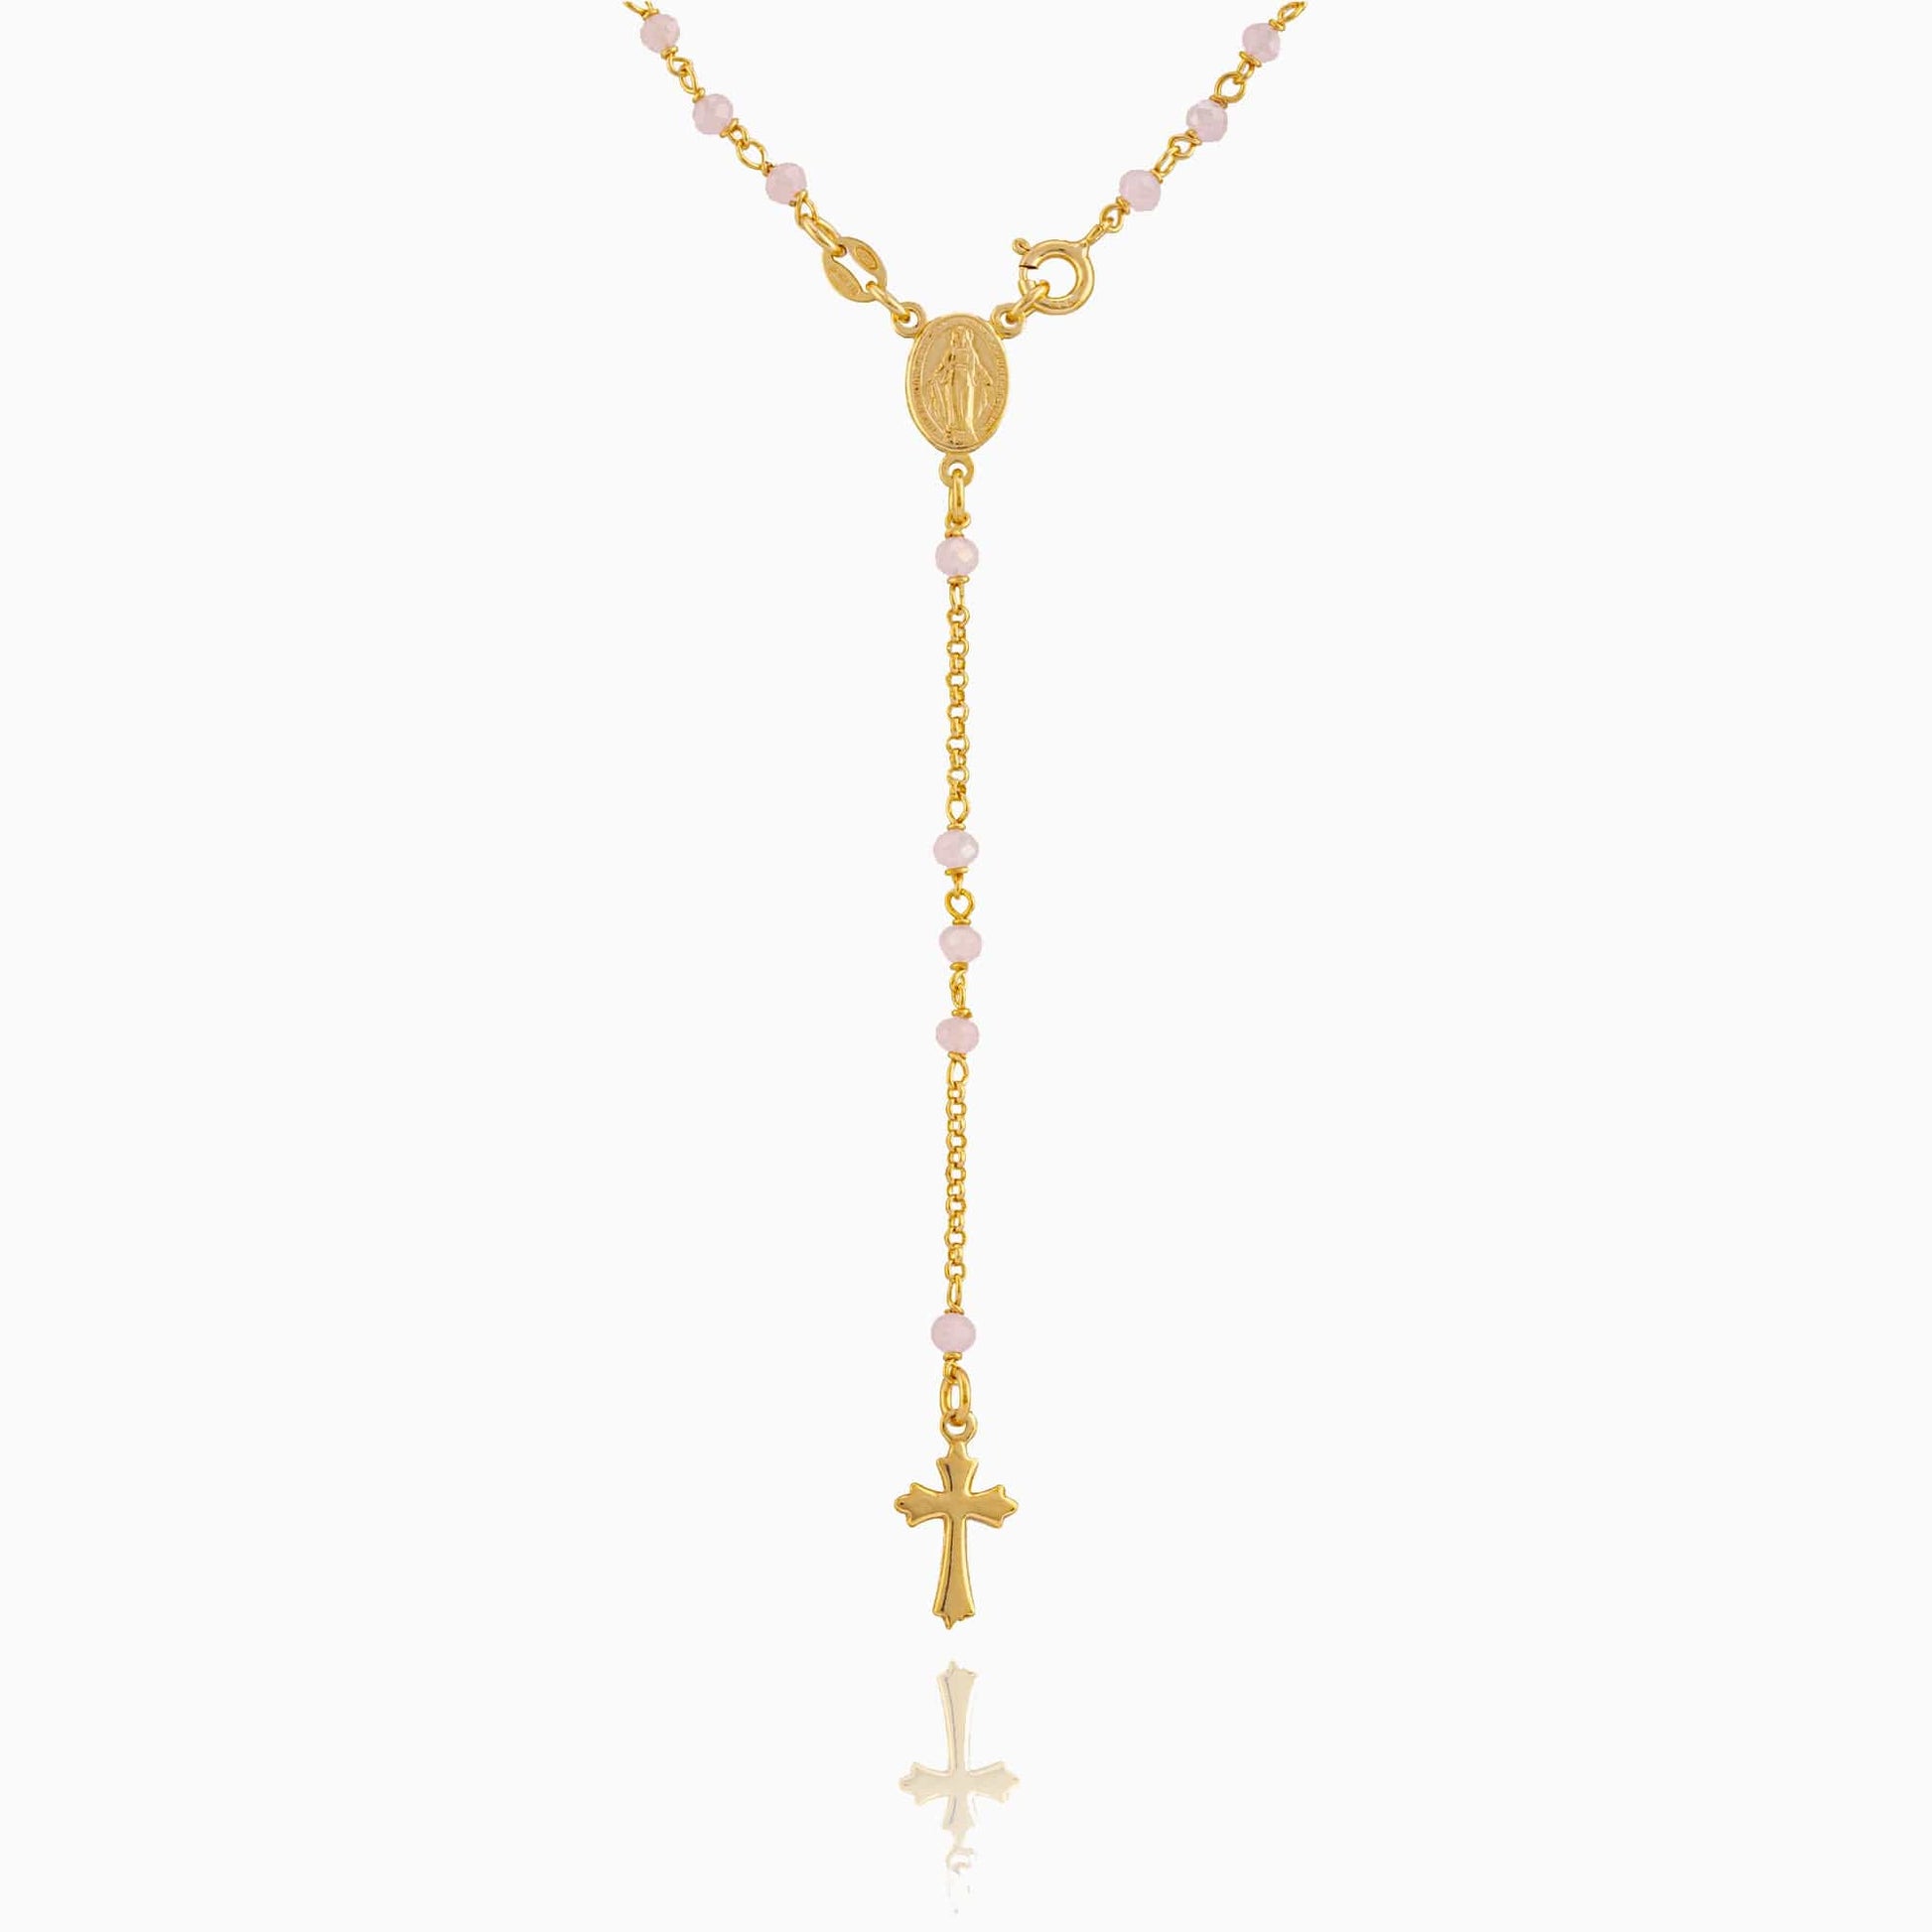 MONDO CATTOLICO Prayer Beads Gold / Cm 50 (19.7 in) Miraculous Mary Rosary Pink Beads in Sterling Silver